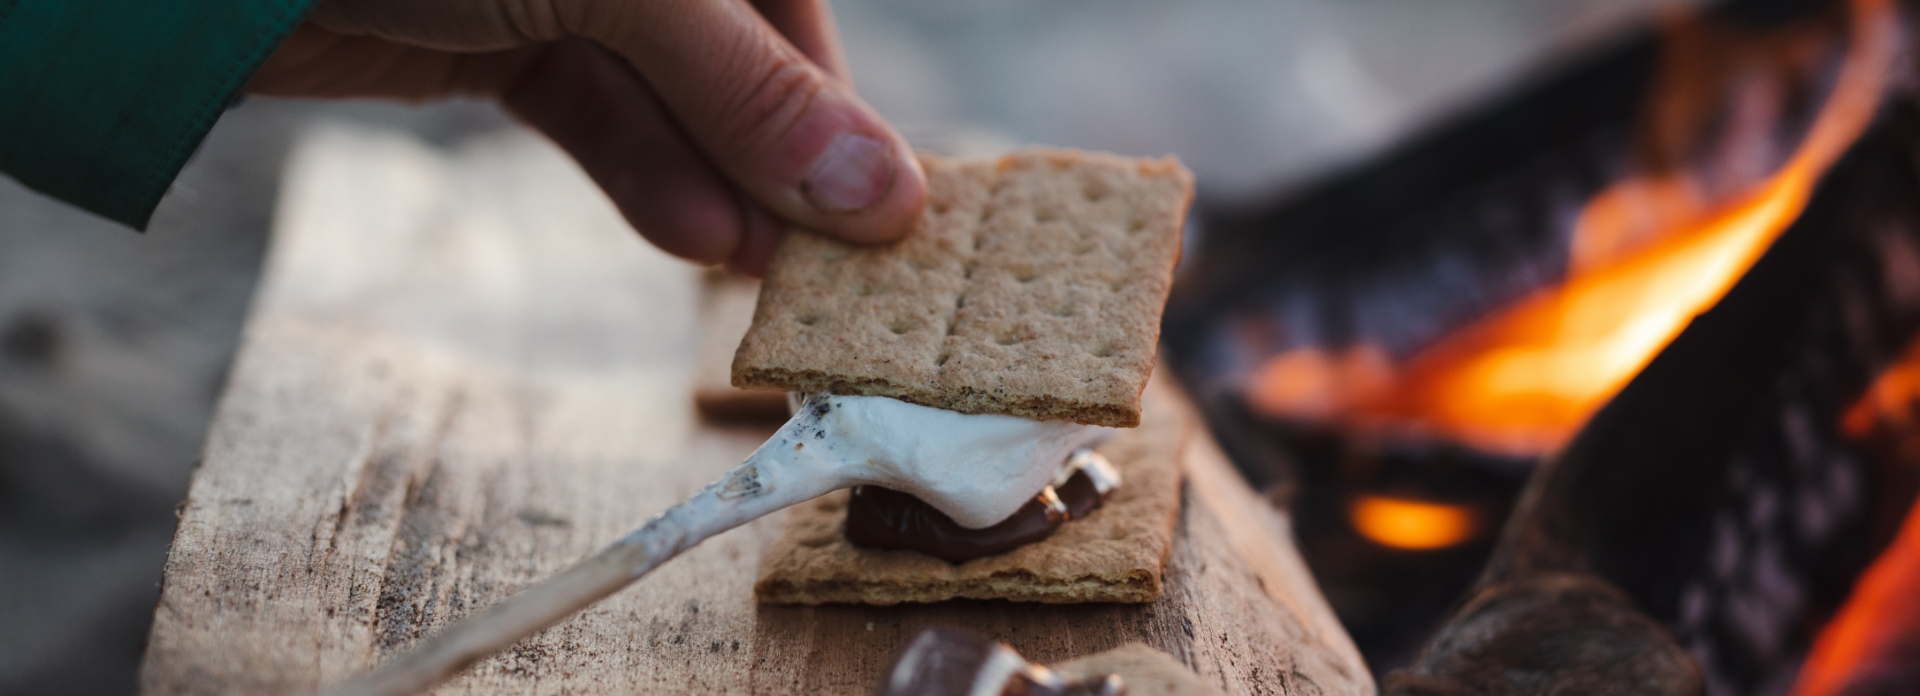 S’mores masterclass <br/> With chef shon foster